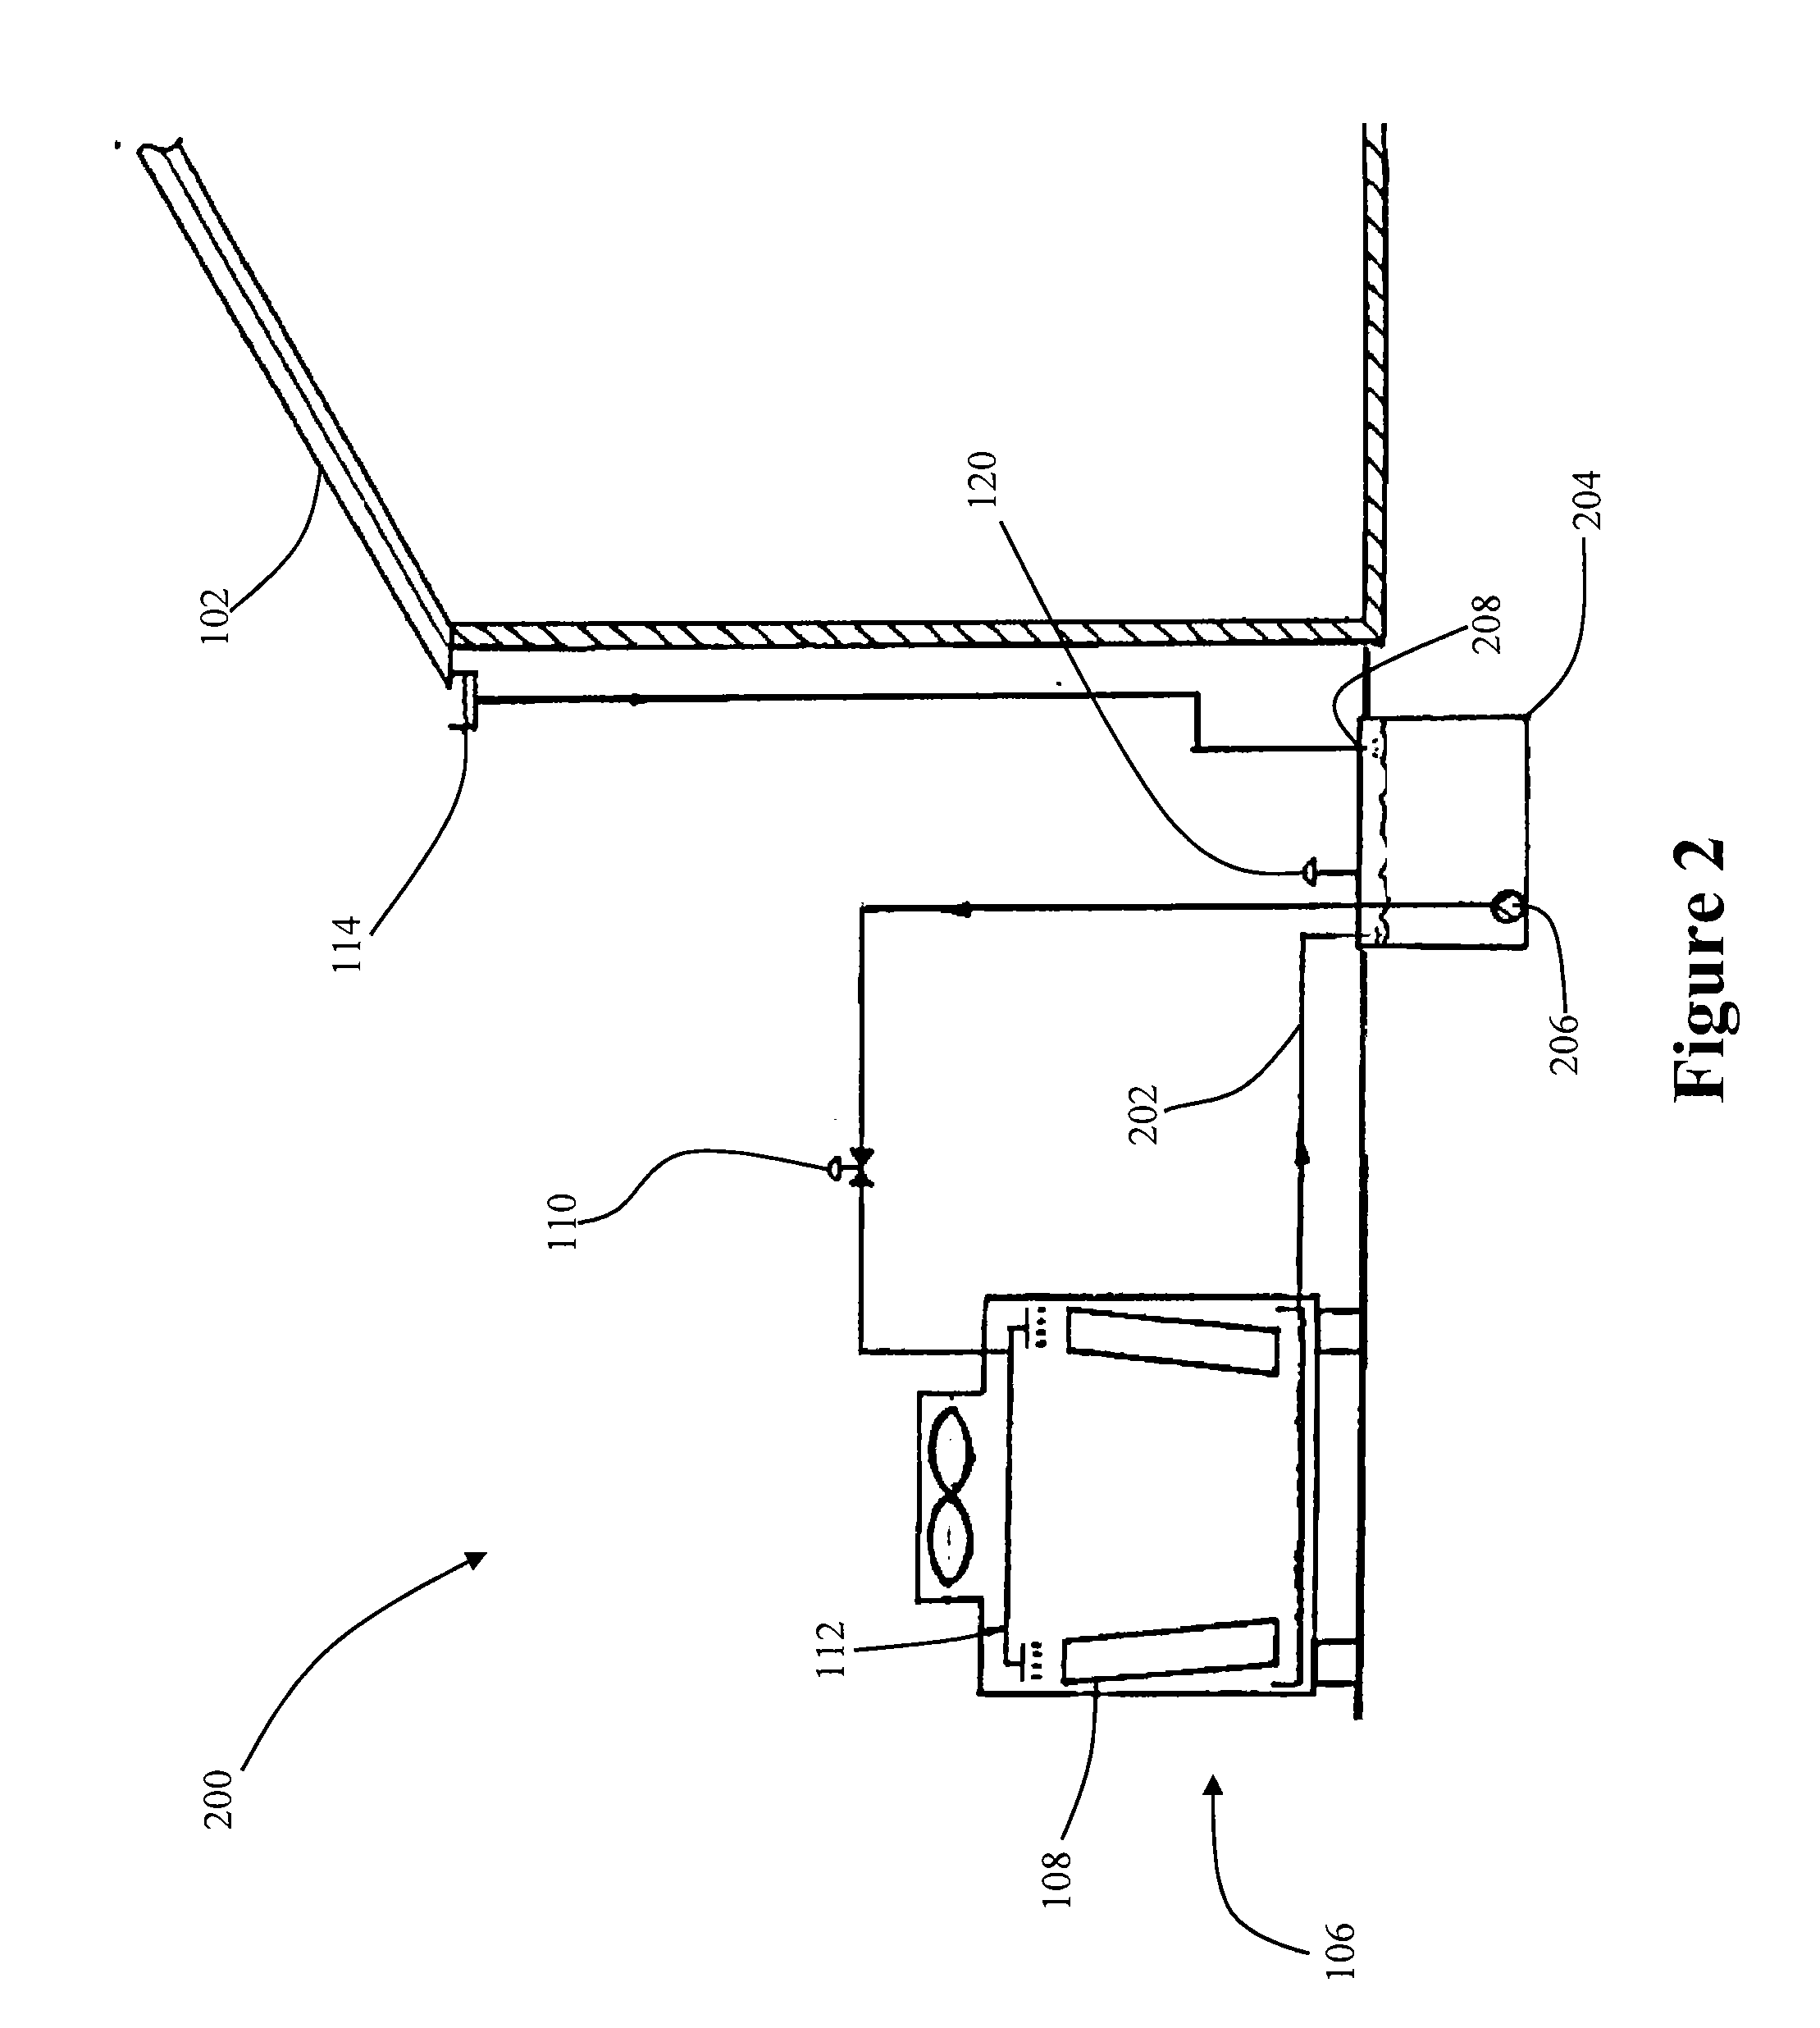 System for Reducing the Condensing Temperature of a Refrigeration or Air Conditioning System by Utilizing Harvested Rainwater